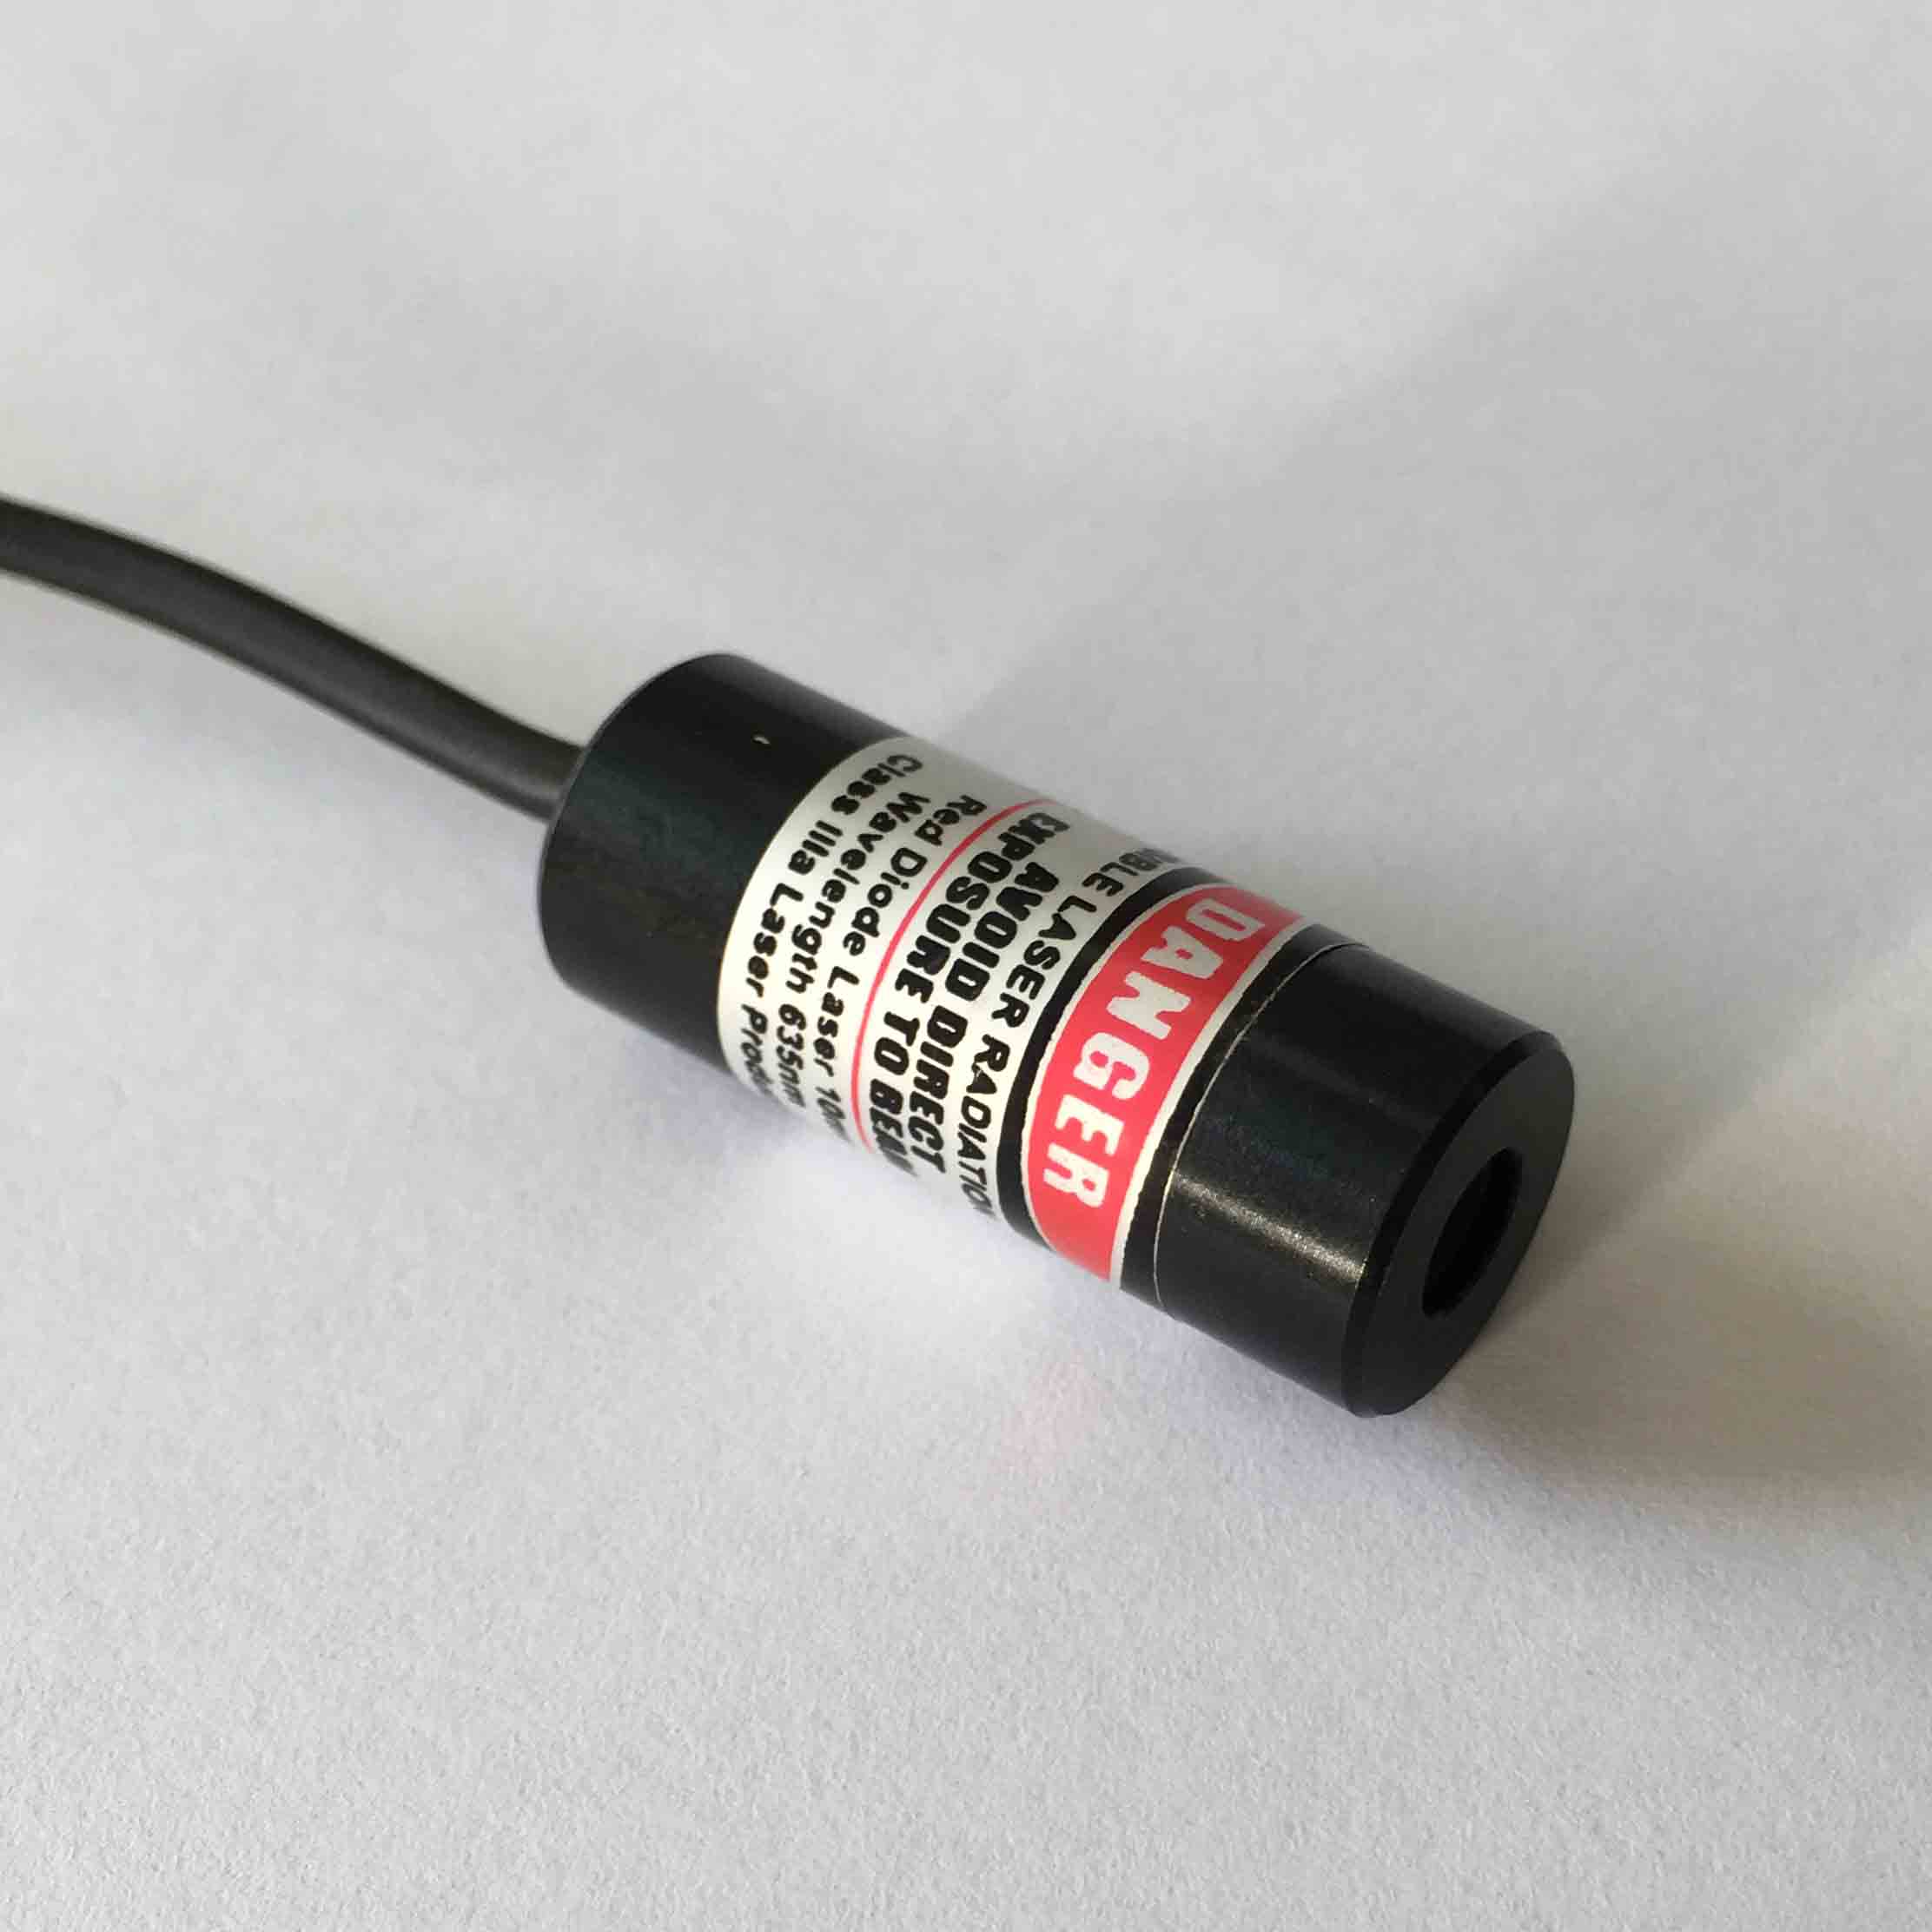 Compact 5mW 532nm Laser Wavelength Diode Pumped Solid State (DPSS) Laser Manufacturer